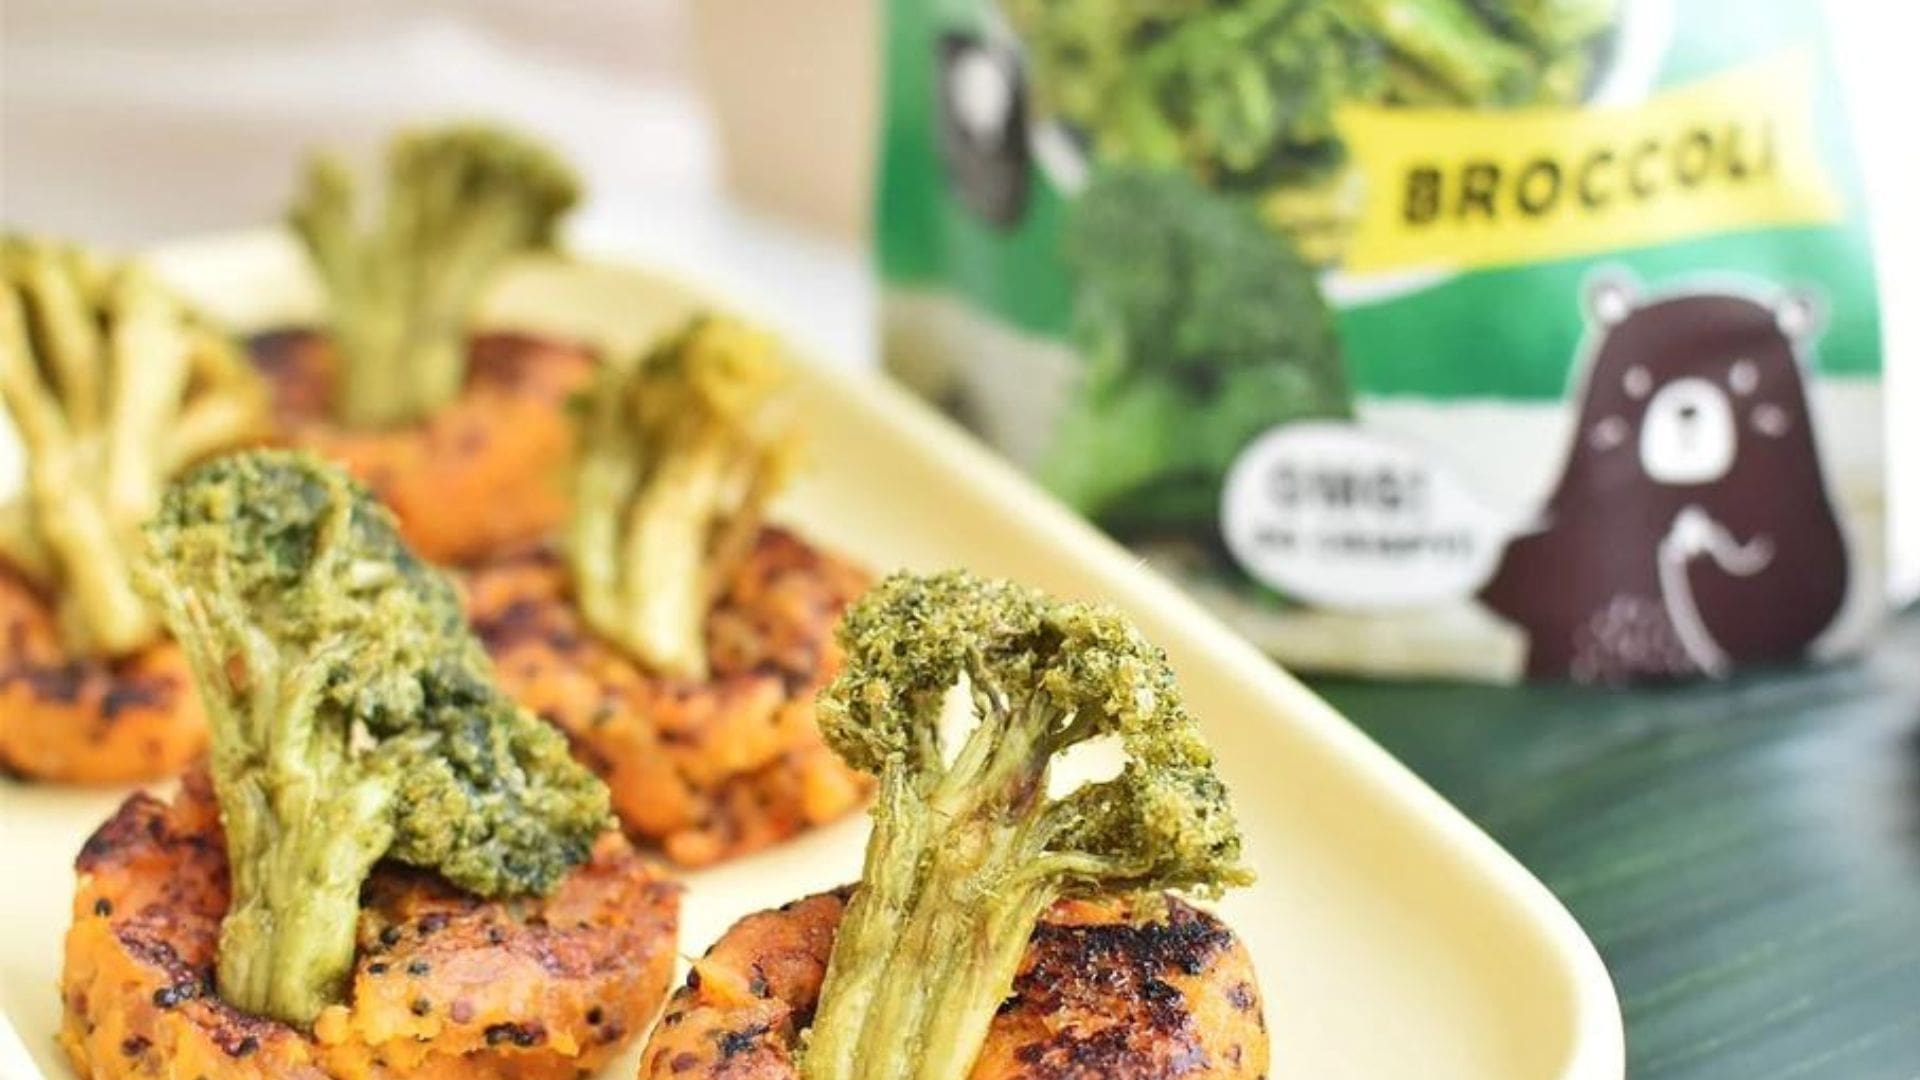 The ULTIMATE Mashed Sweet Potato with Broccoli Chips Recipe